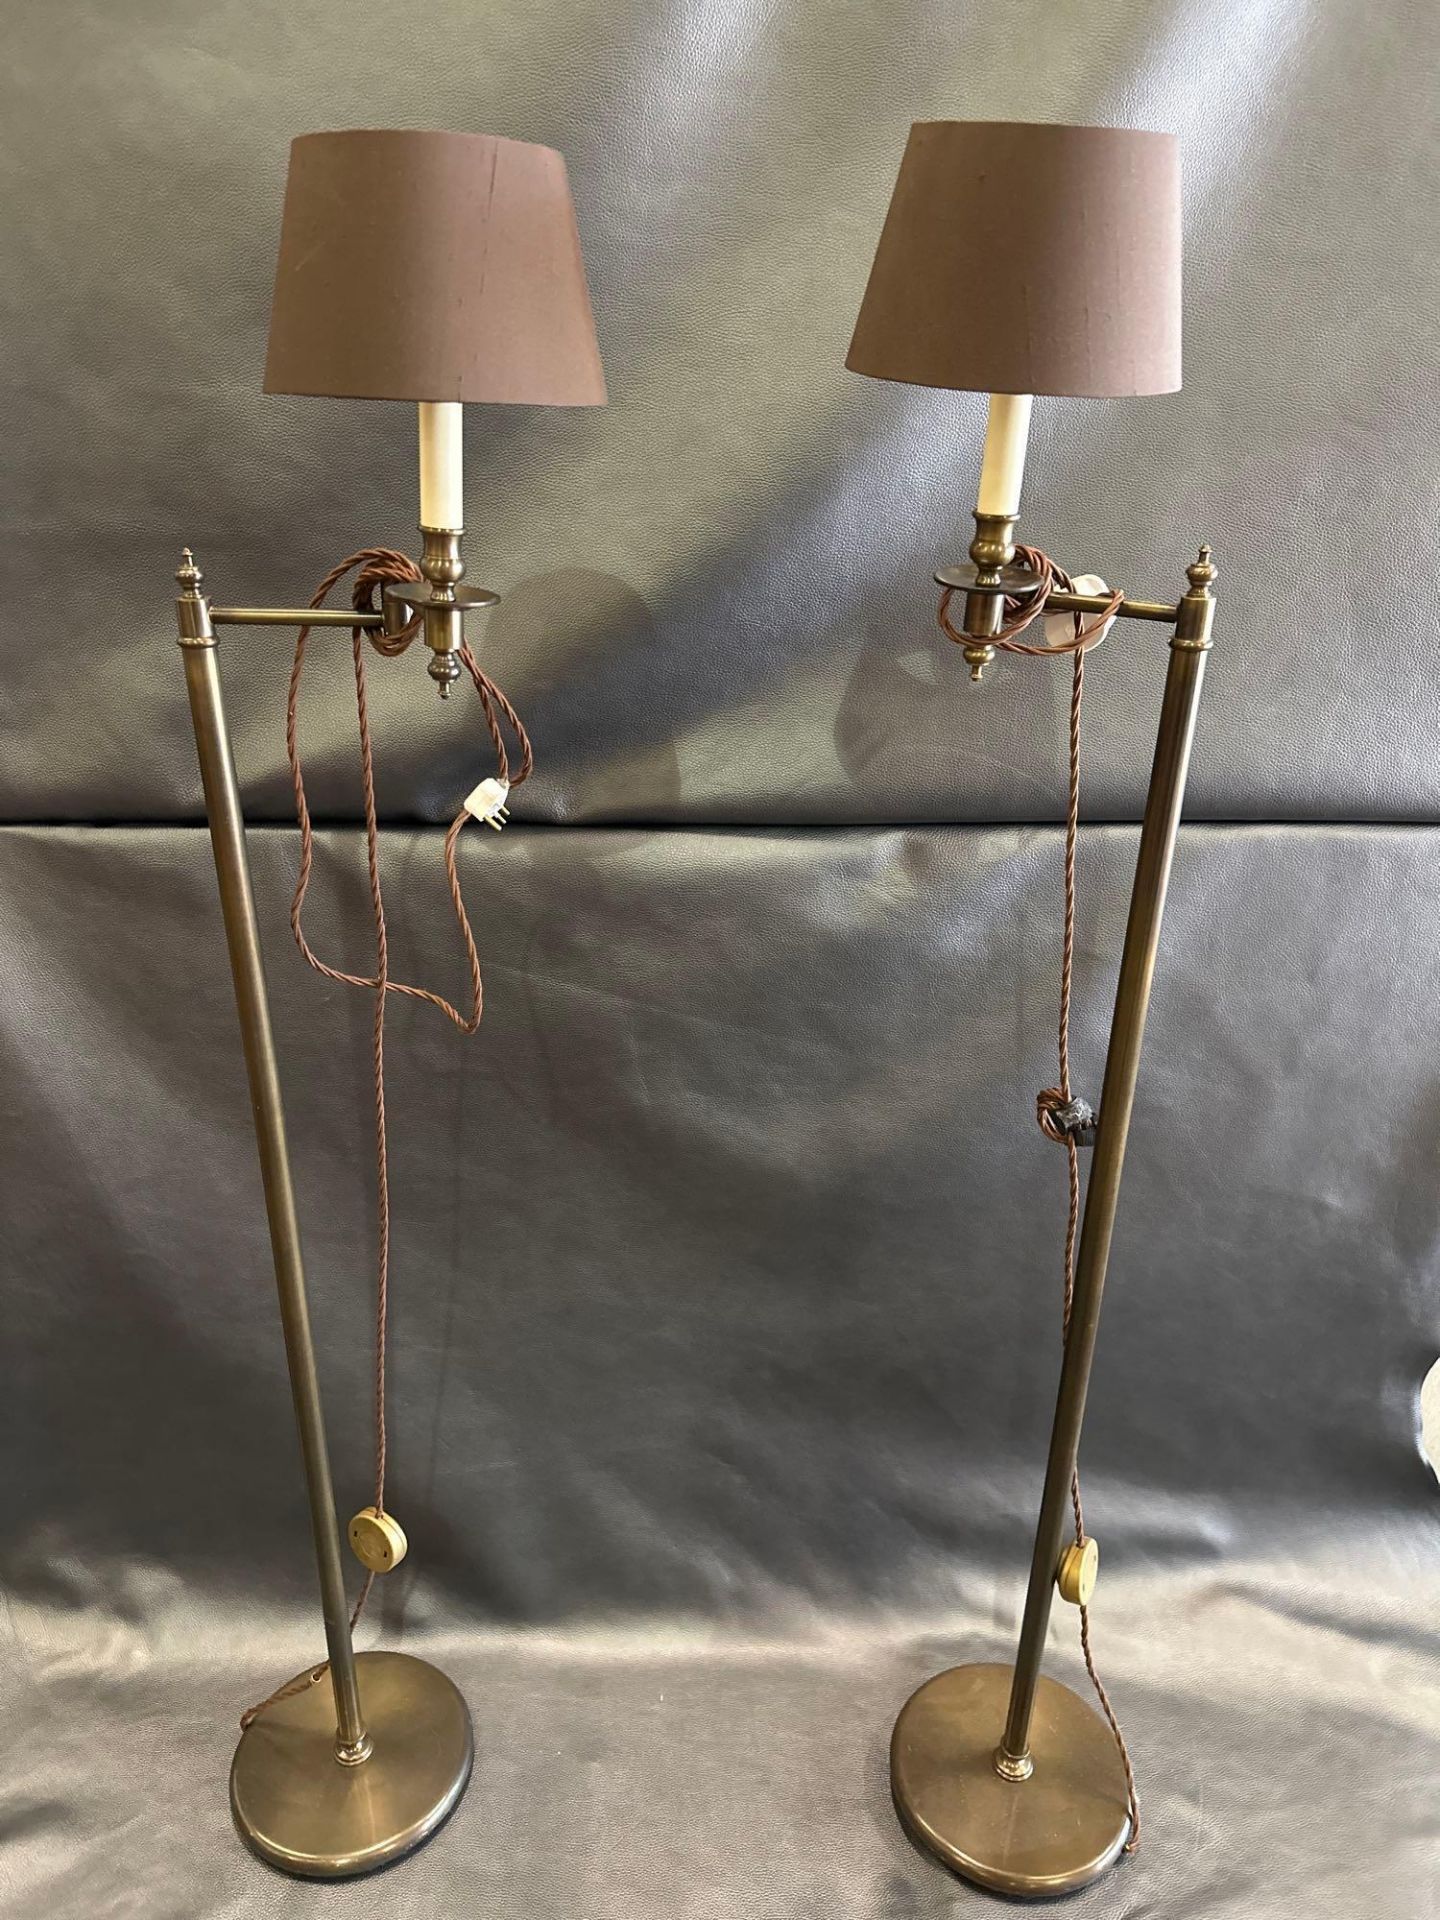 A Pair Library Floor Lamps Finished In English Bronze Swing Arm Function With Shade 156cm - Image 4 of 5